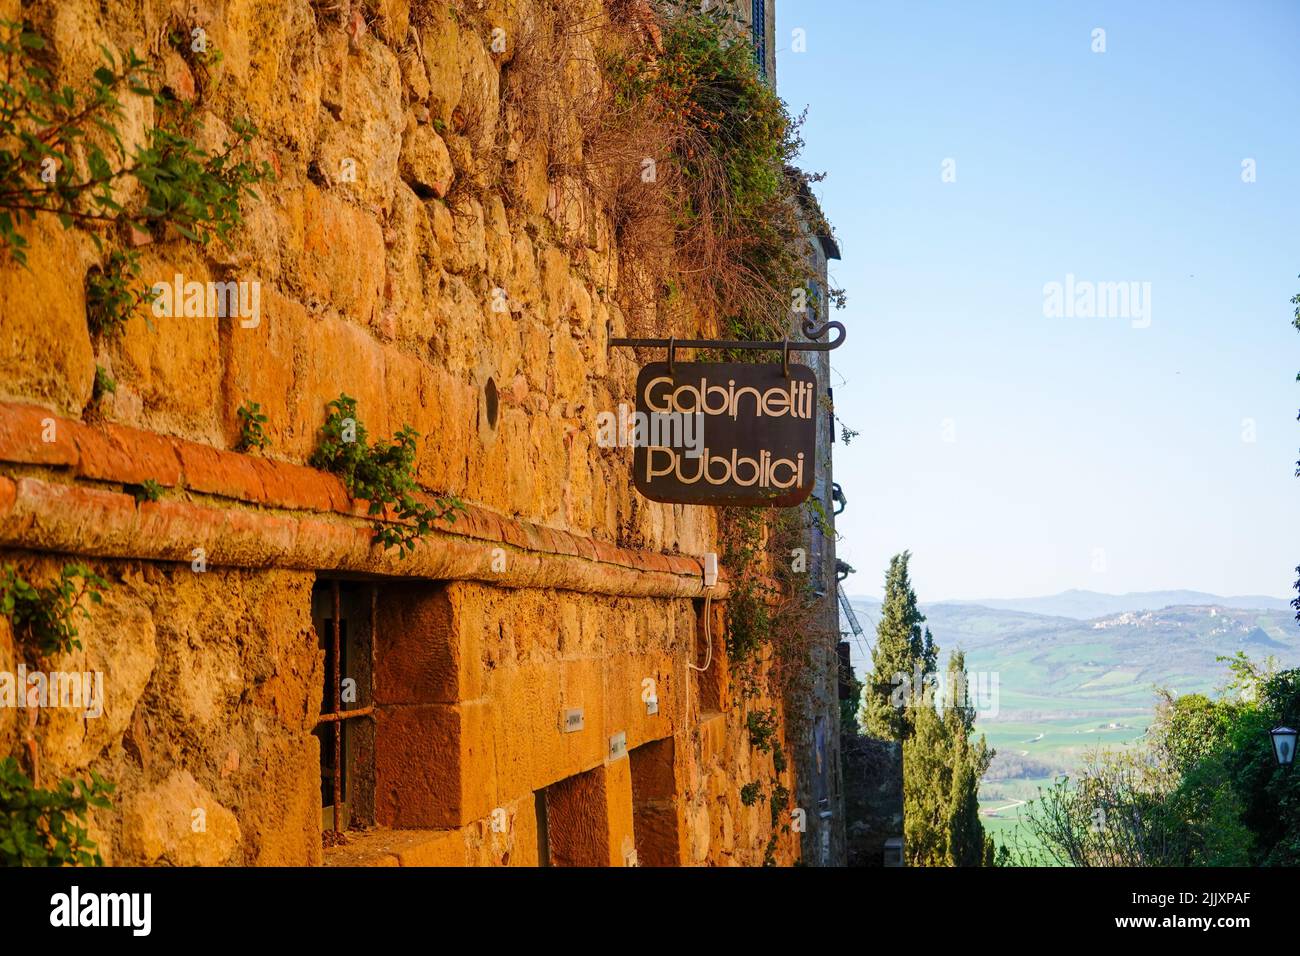 Sign on an old weathered stone building advertising the public toilets, Gabinetti Pubblici, in the Tuscan hillside town of Pienza, Italy. Stock Photo